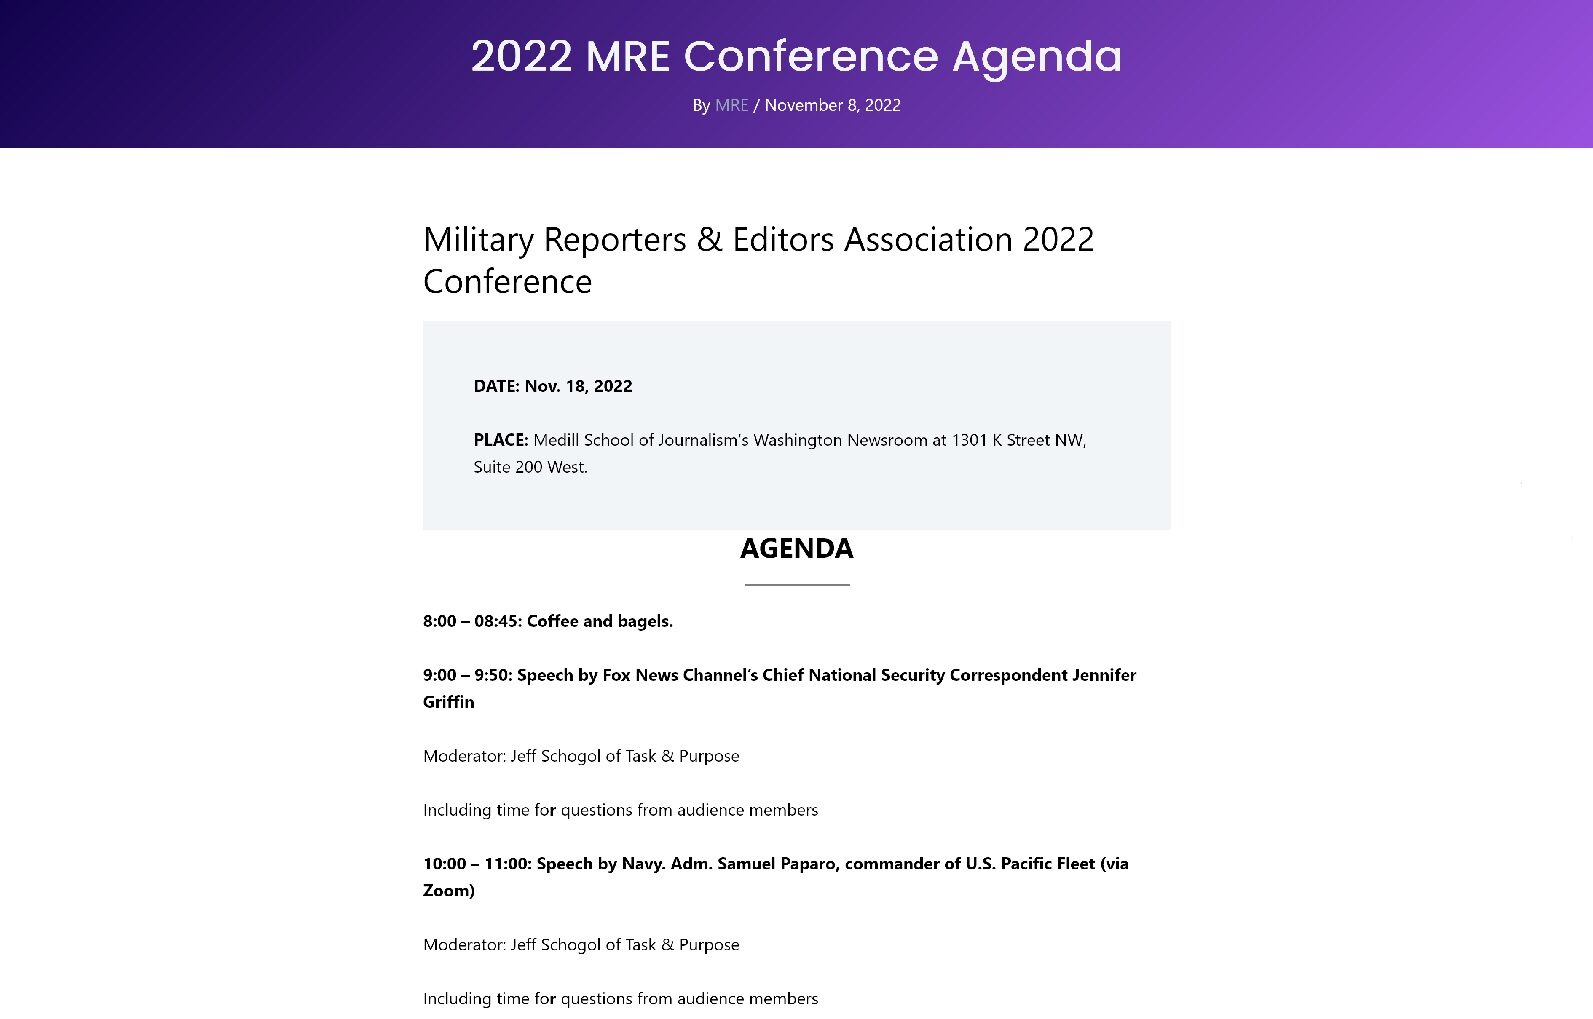 MRE 2022 conference agenda featured image